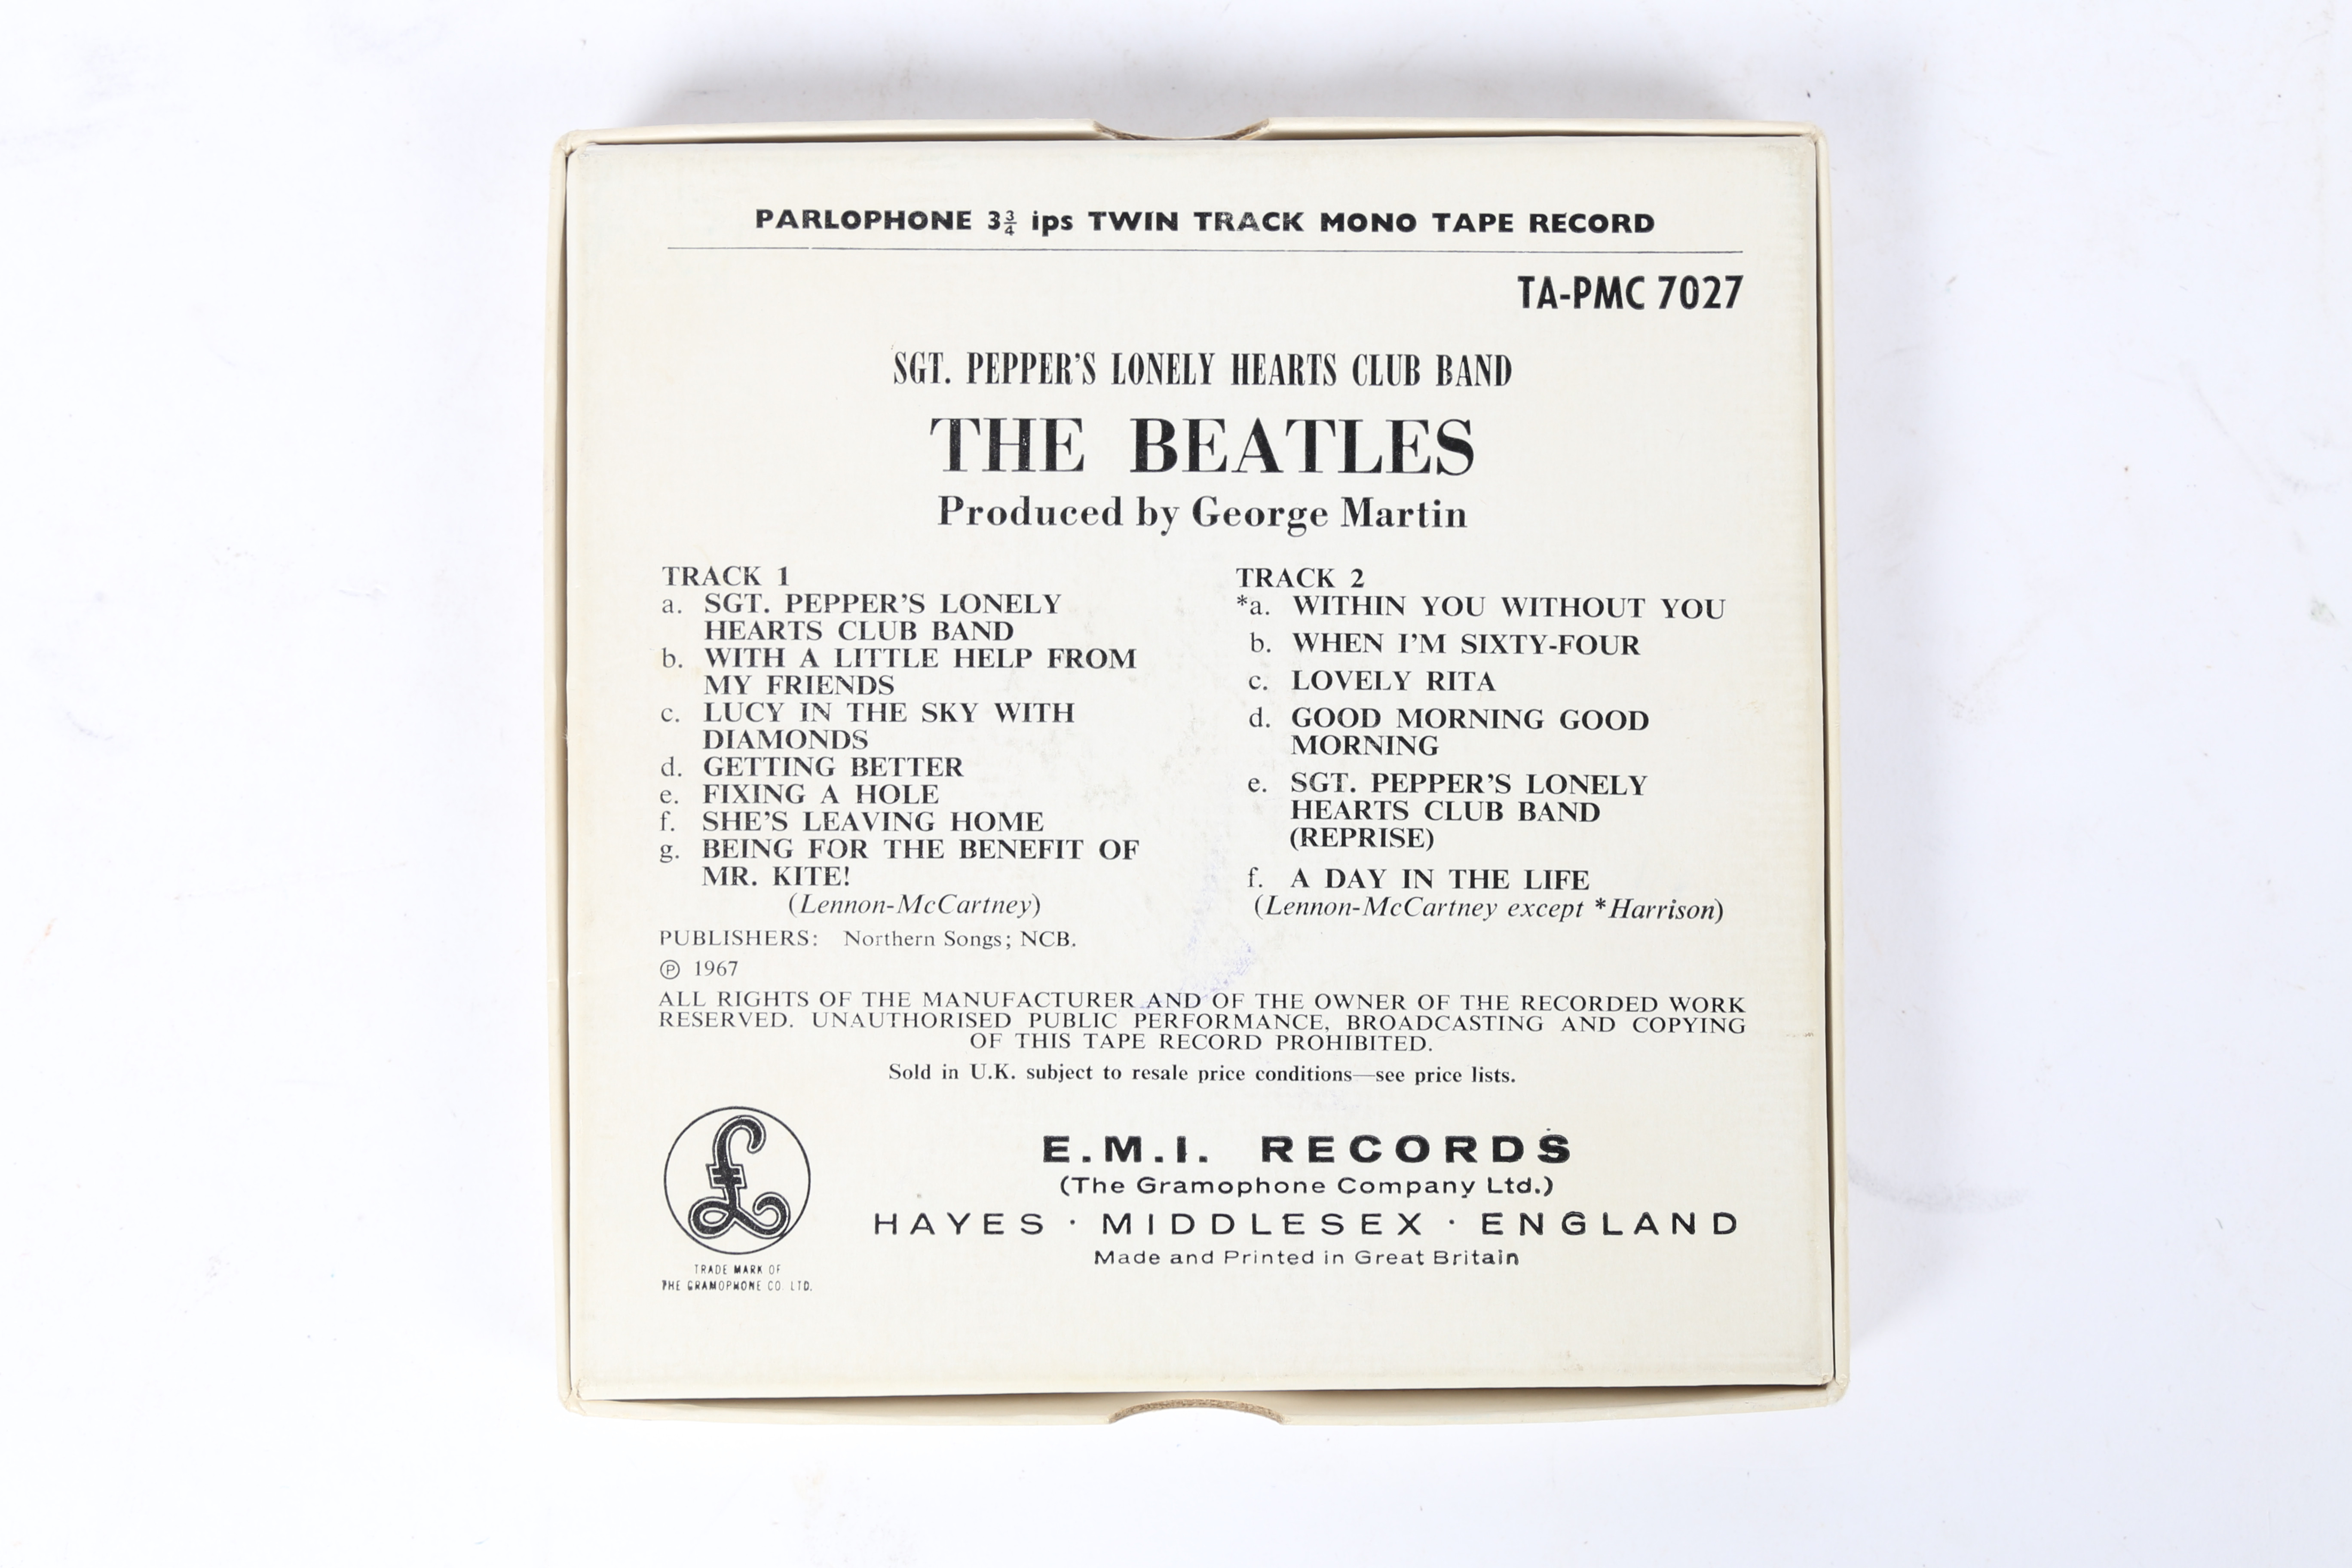 THE BEATLES - SGT. PEPPER'S LONELY HEARTS CLUB BAND REEL TO REEL. - Image 4 of 4